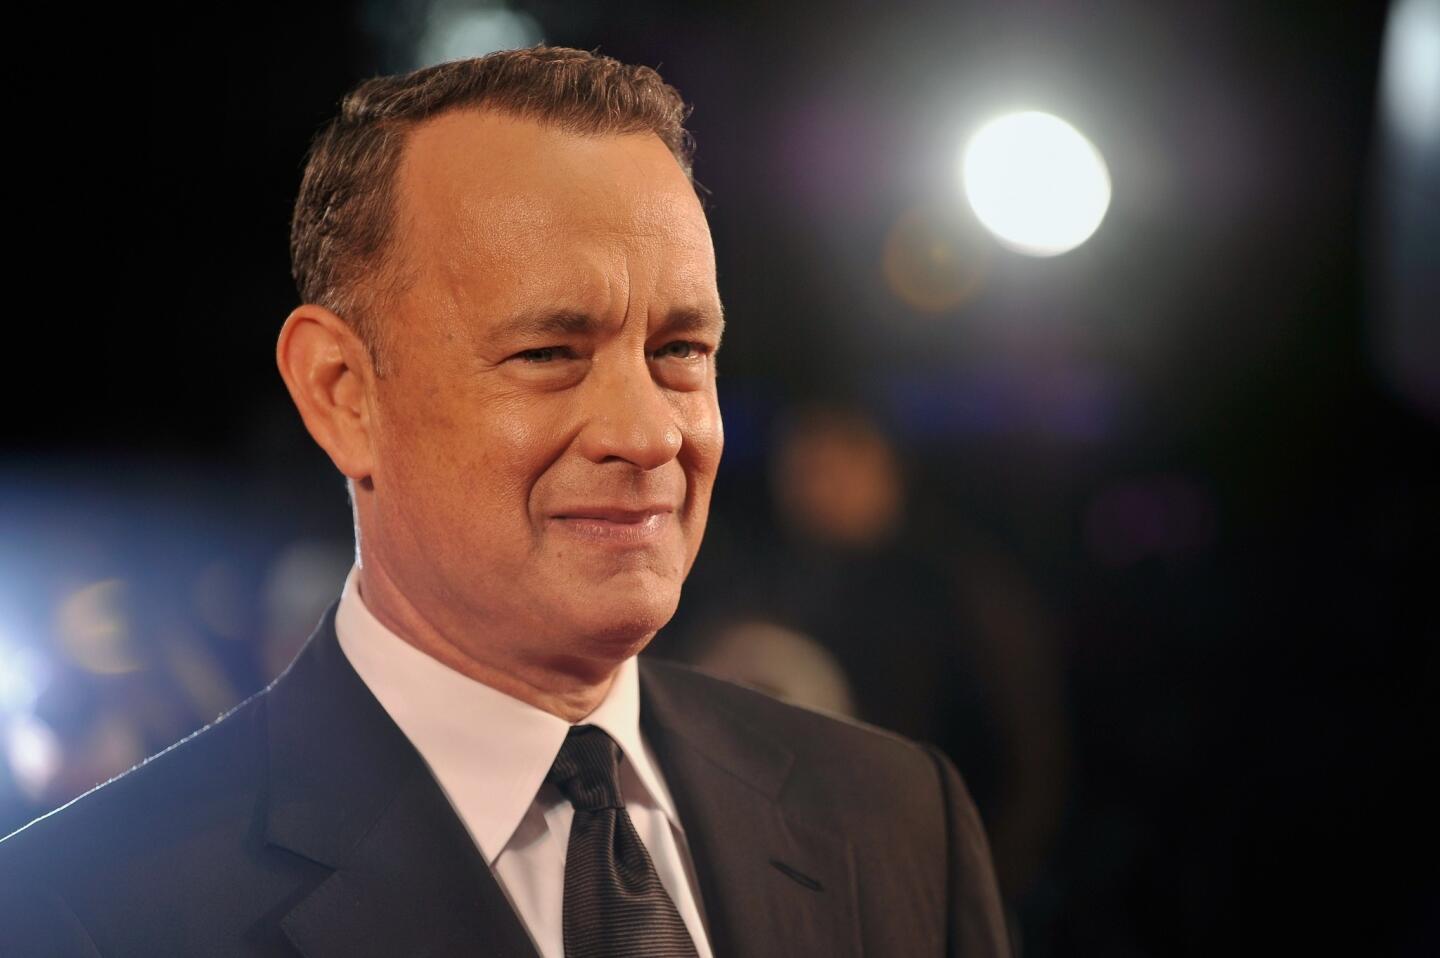 Part of a 10-part CNN documentary series titled "The Sixties," this film co-produced by Tom Hanks, pictured, explores the findings of the controversial Warren Commission and the effect of the assassination on the nation and American politics.